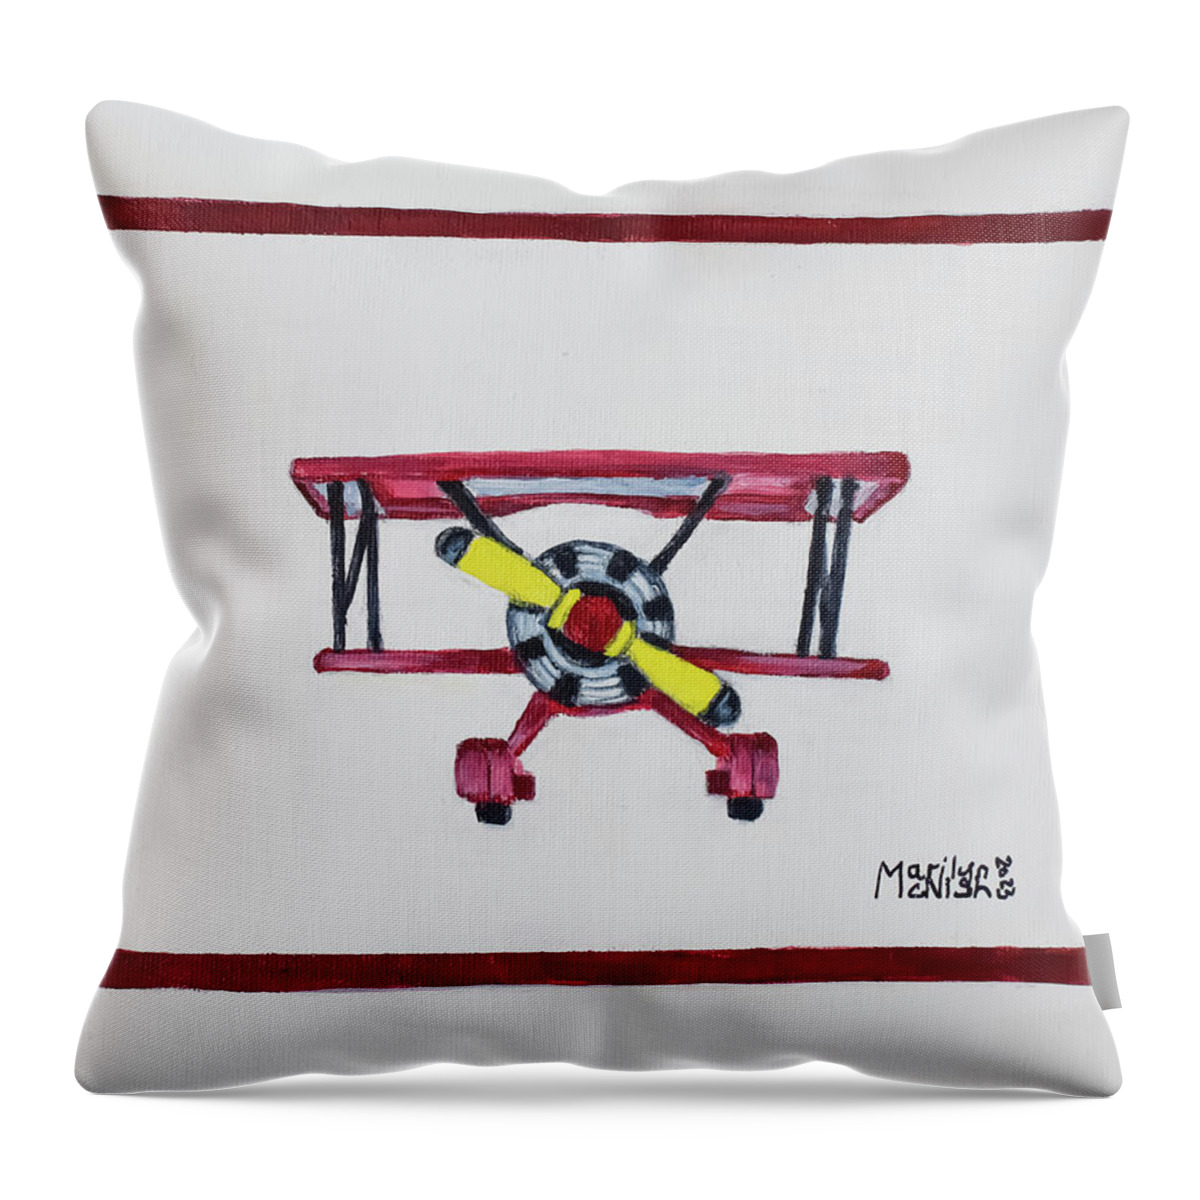 Biplane Throw Pillow featuring the painting Biplane by Marilyn McNish